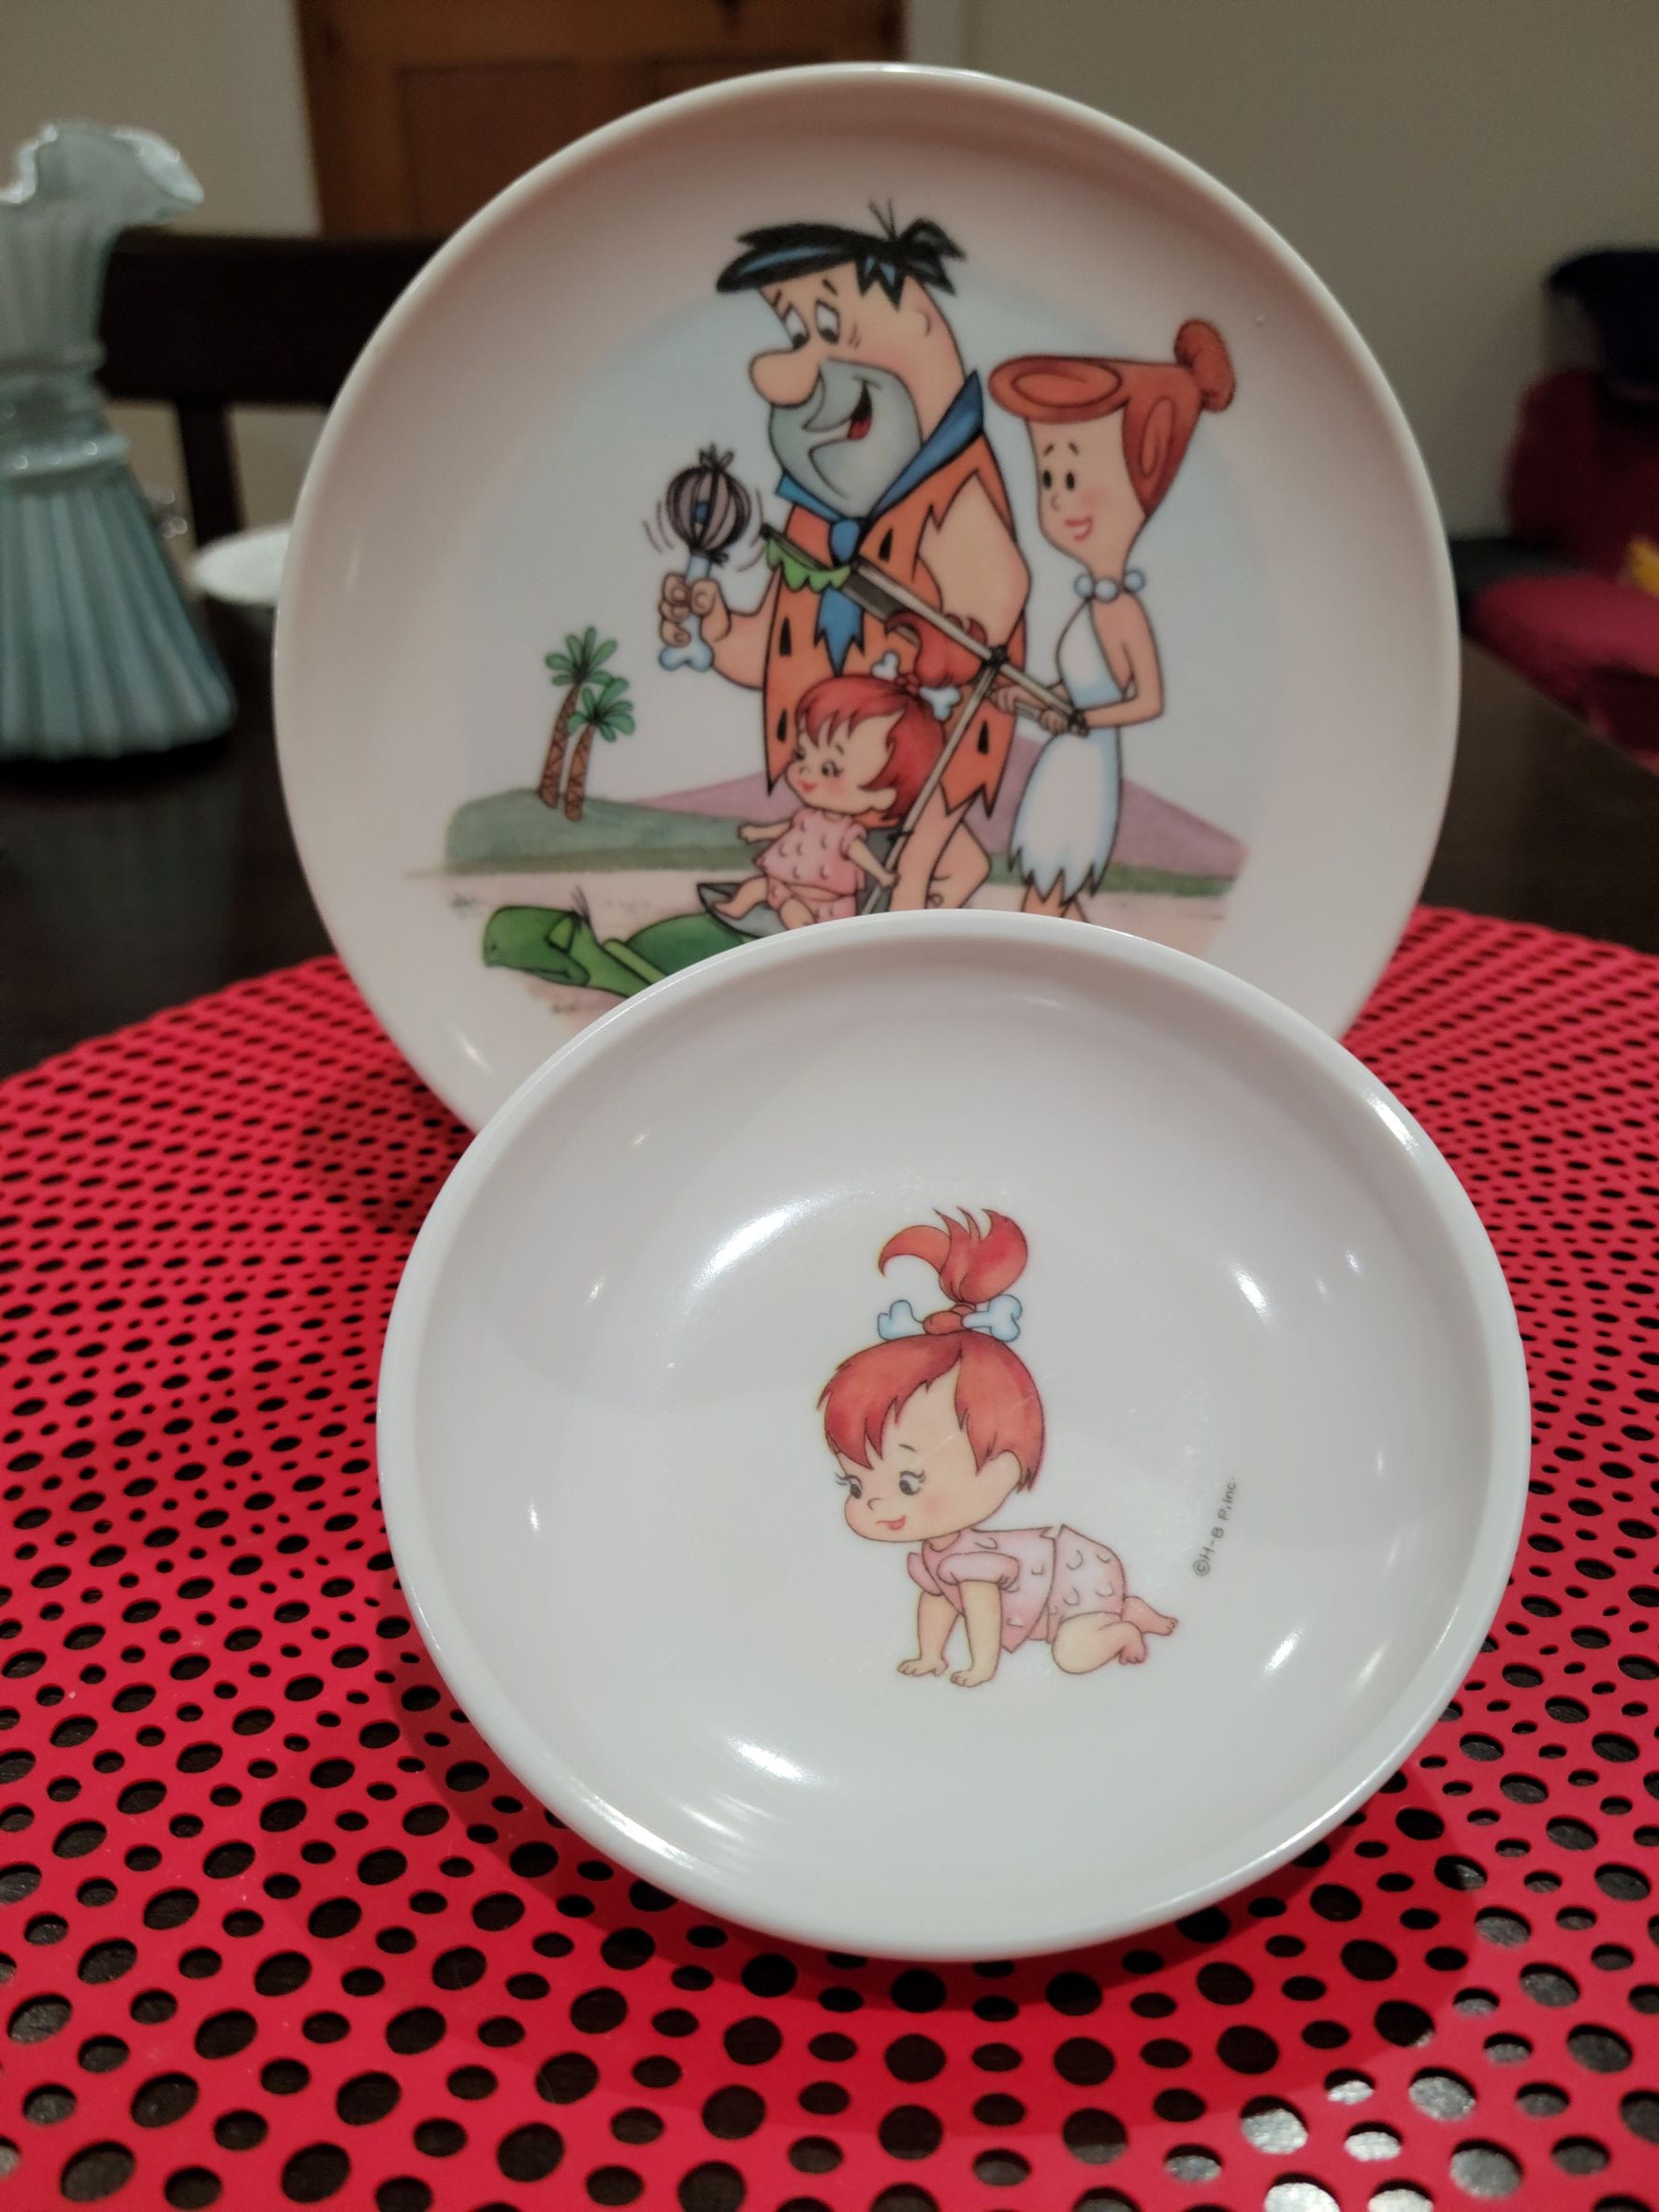 Vintage FLINTSTONES Plate and Bowl Set Featuring PEBBLES in